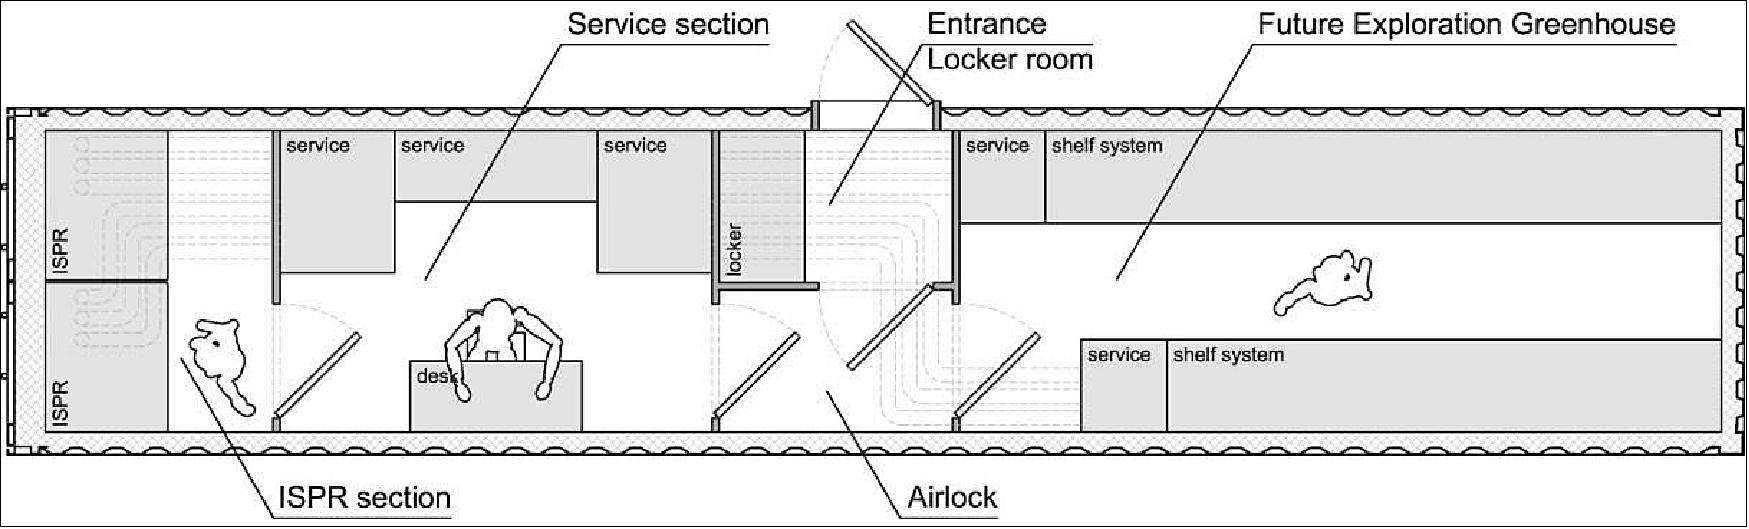 Figure 1: Draft internal configuration of the mobile test facility (EDEN ISS Team)